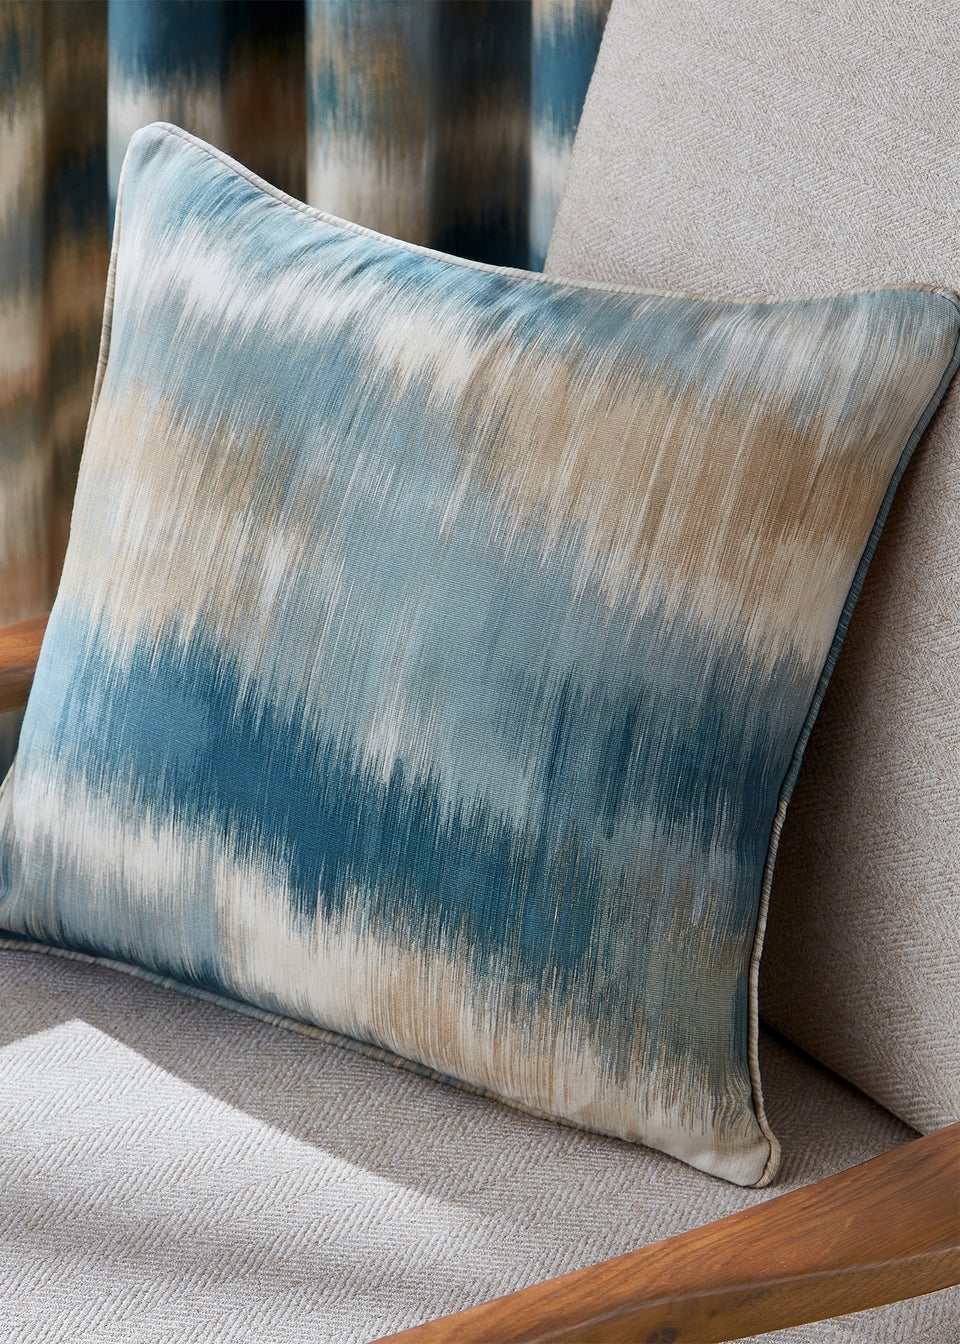 Catherine Lansfield Ombre Texture Cushion (45x45cm)